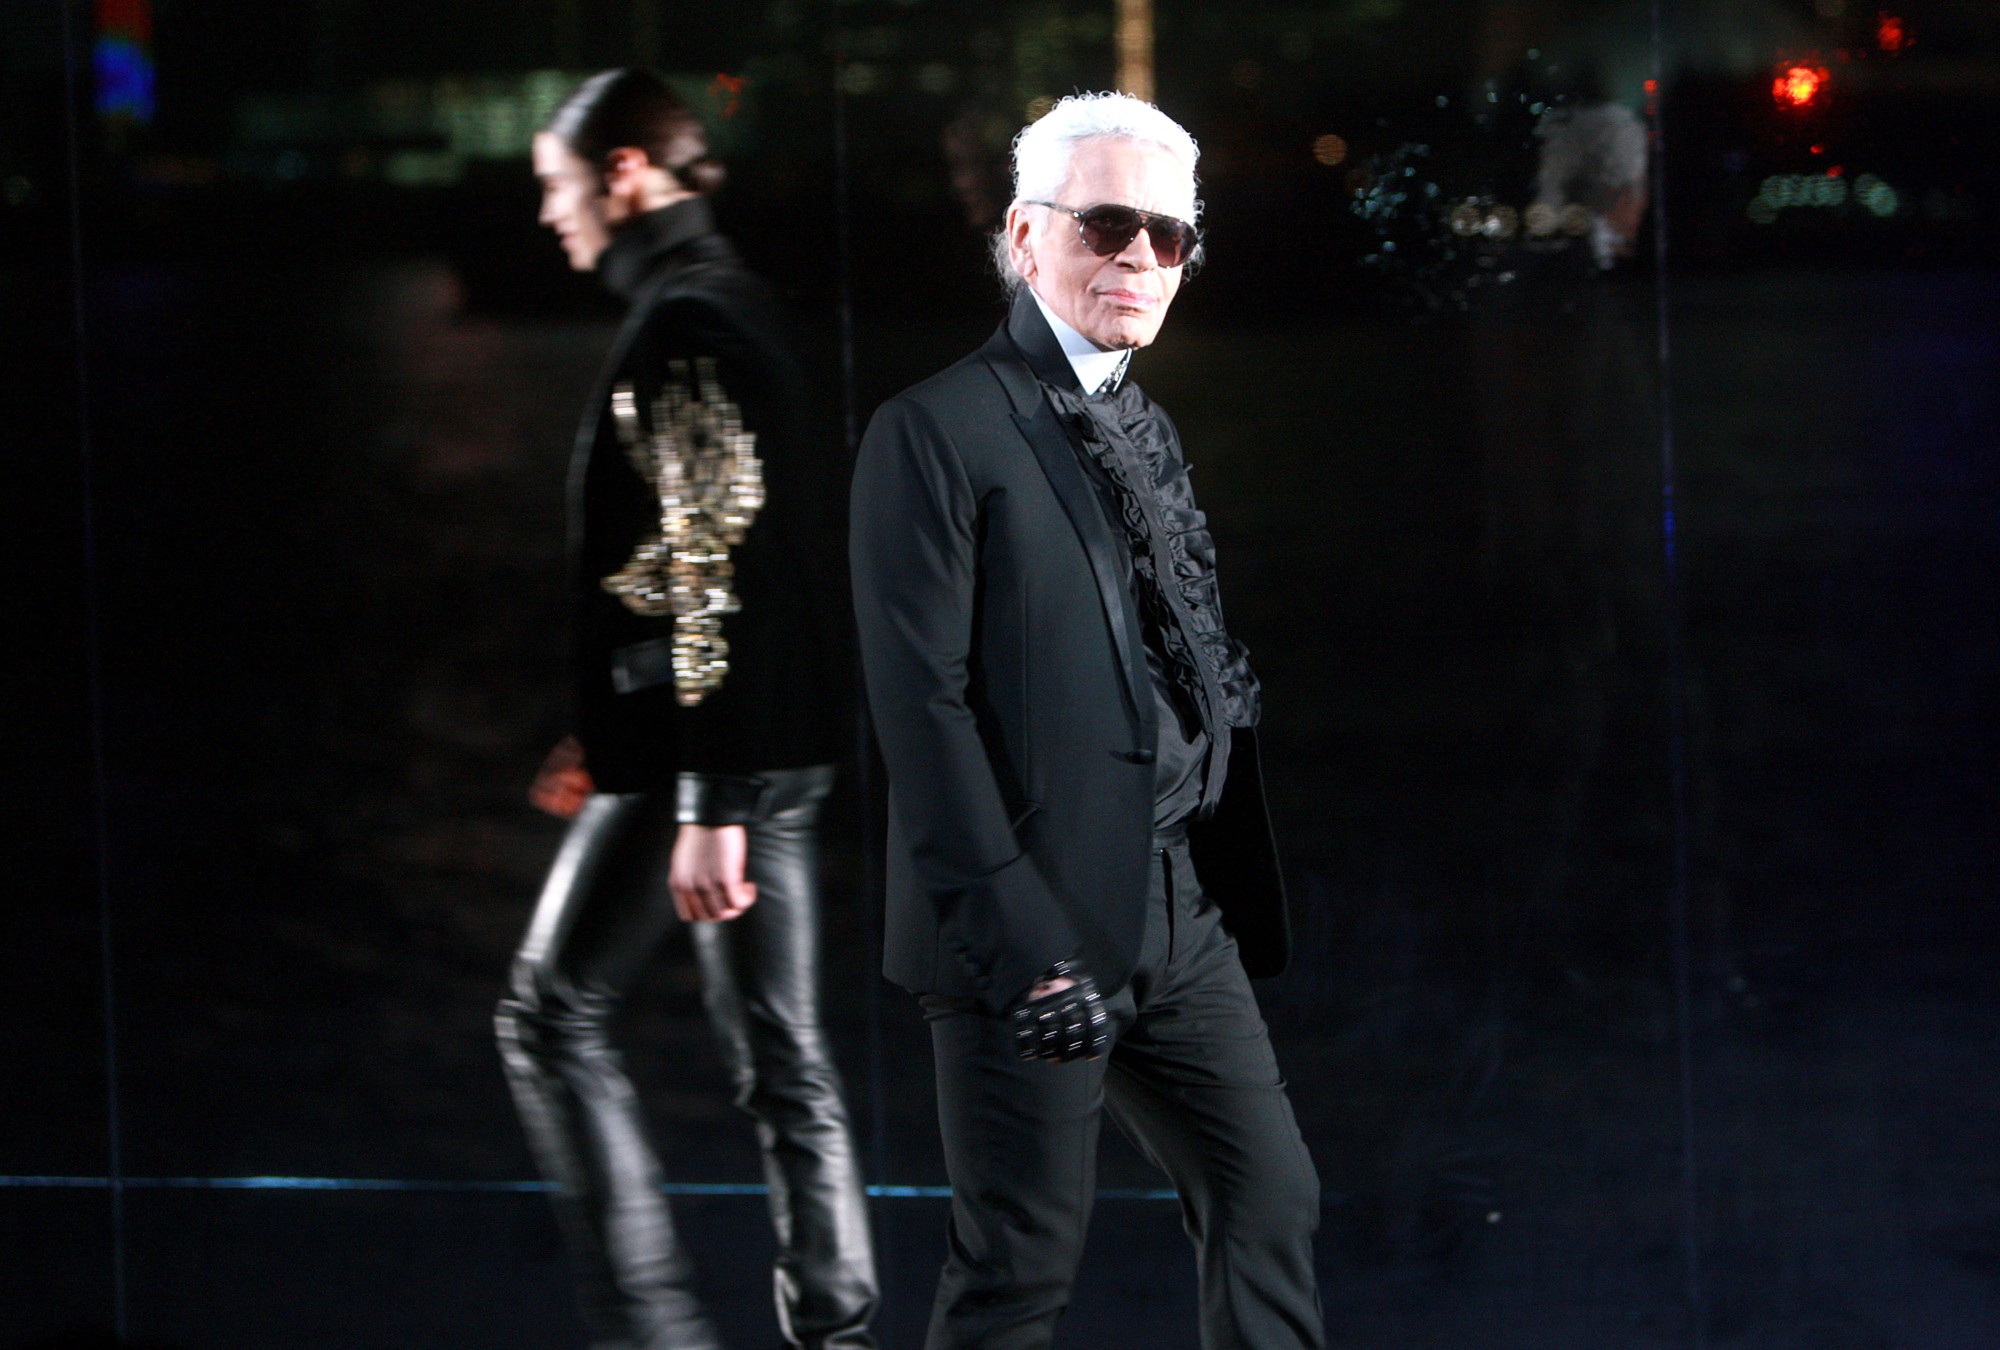 Karl Lagerfeld's Diet Book Plan Included Drinking 10 Diet Cokes Daily